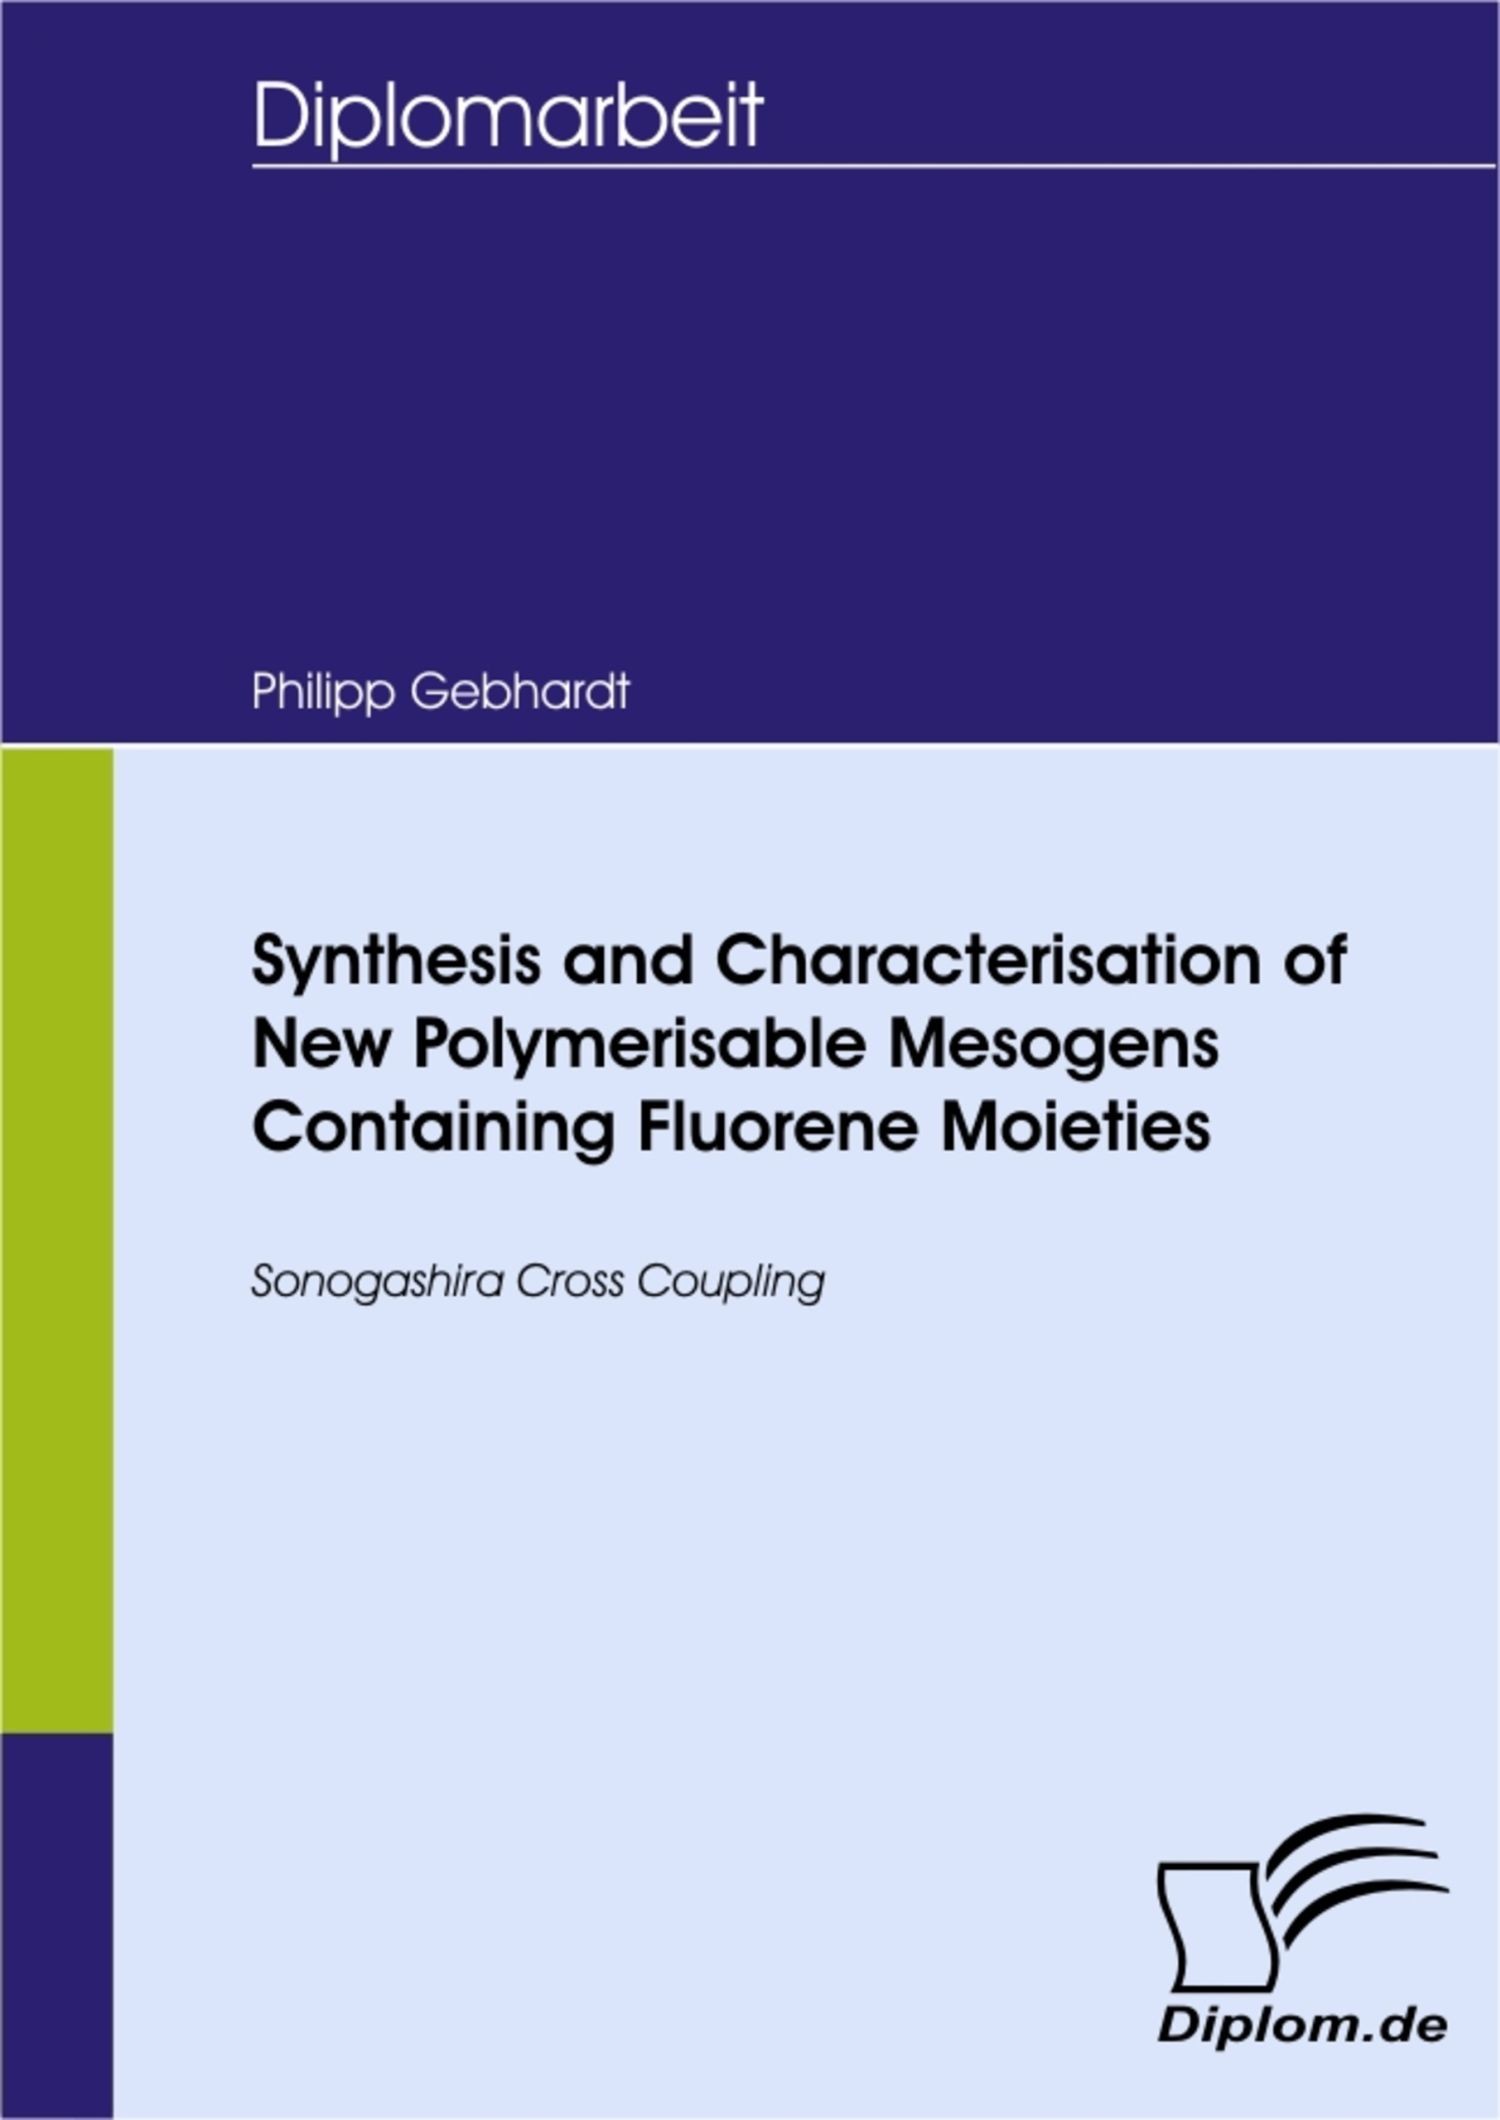 Synthesis and Characterisation of New Polymerisable Mesogens Containing Fluorene Moieties